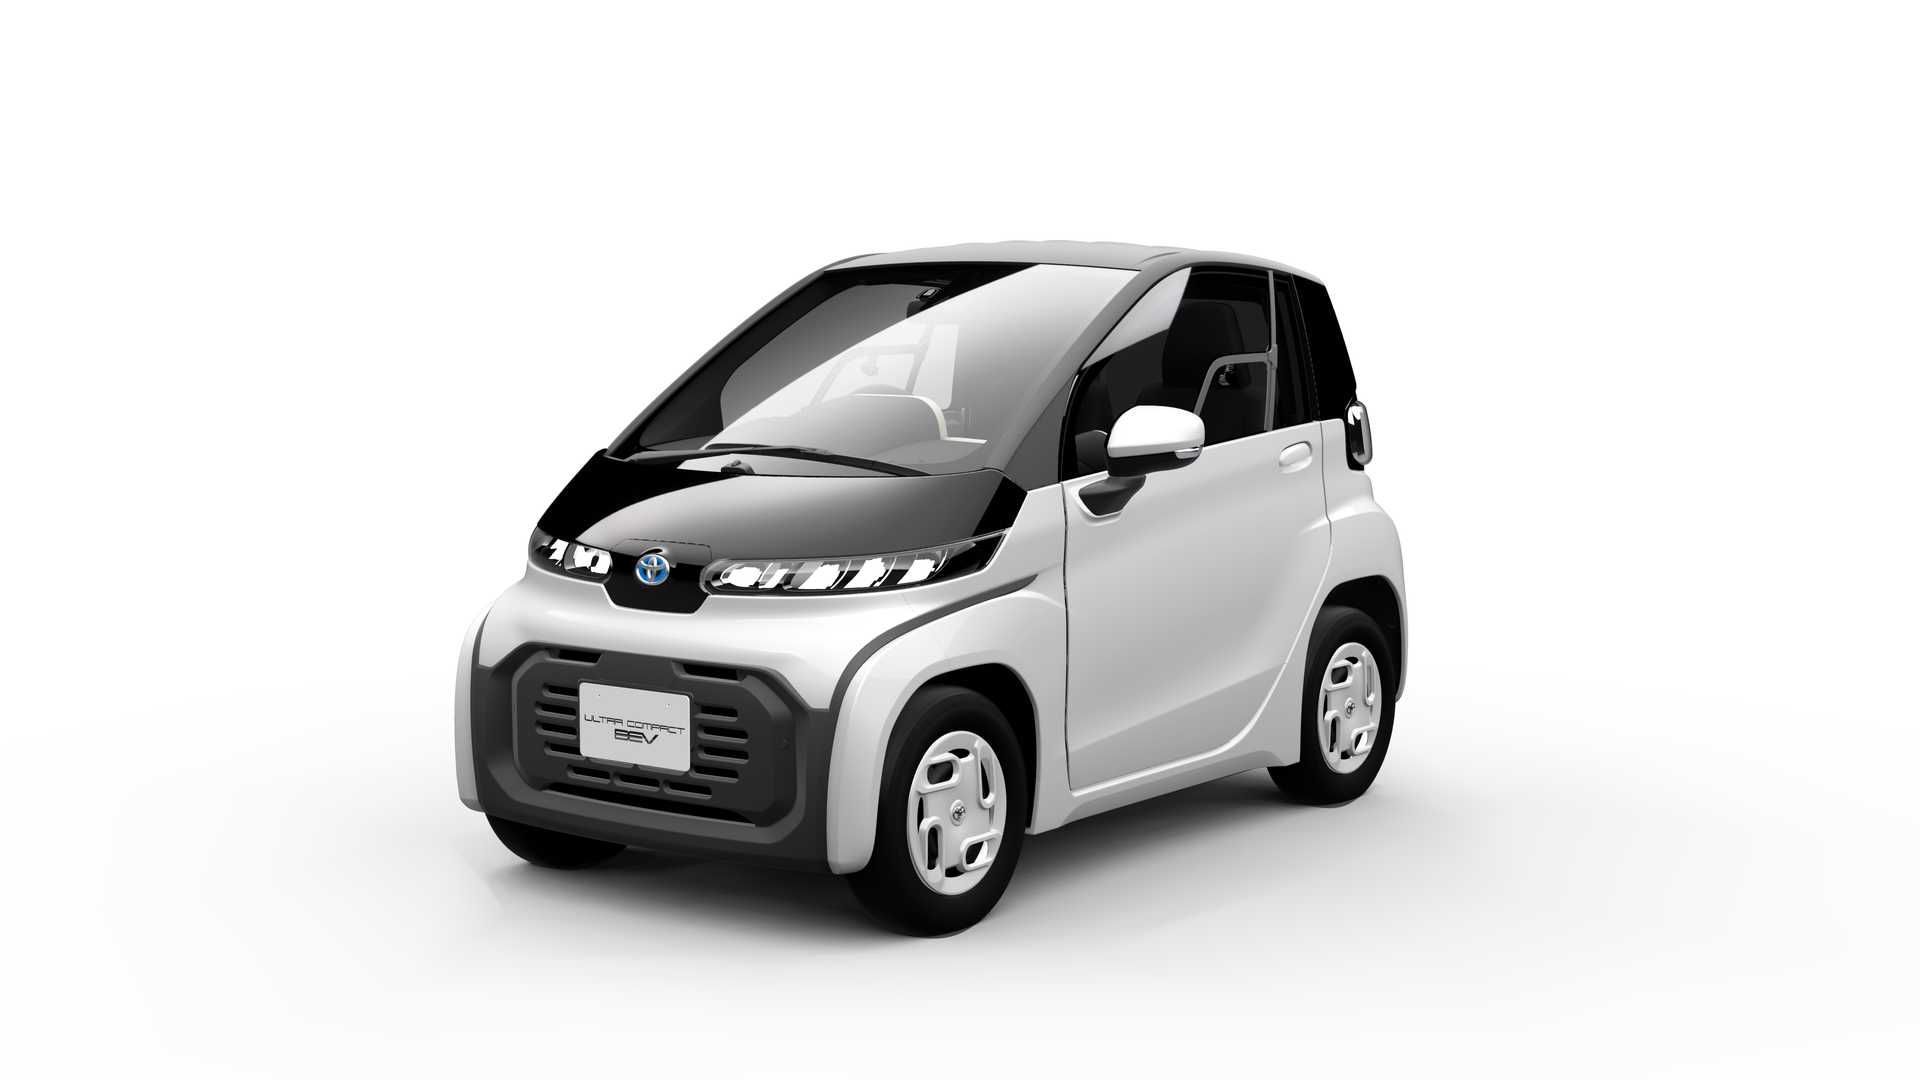 Toyota reveals electric minicar due in 2020